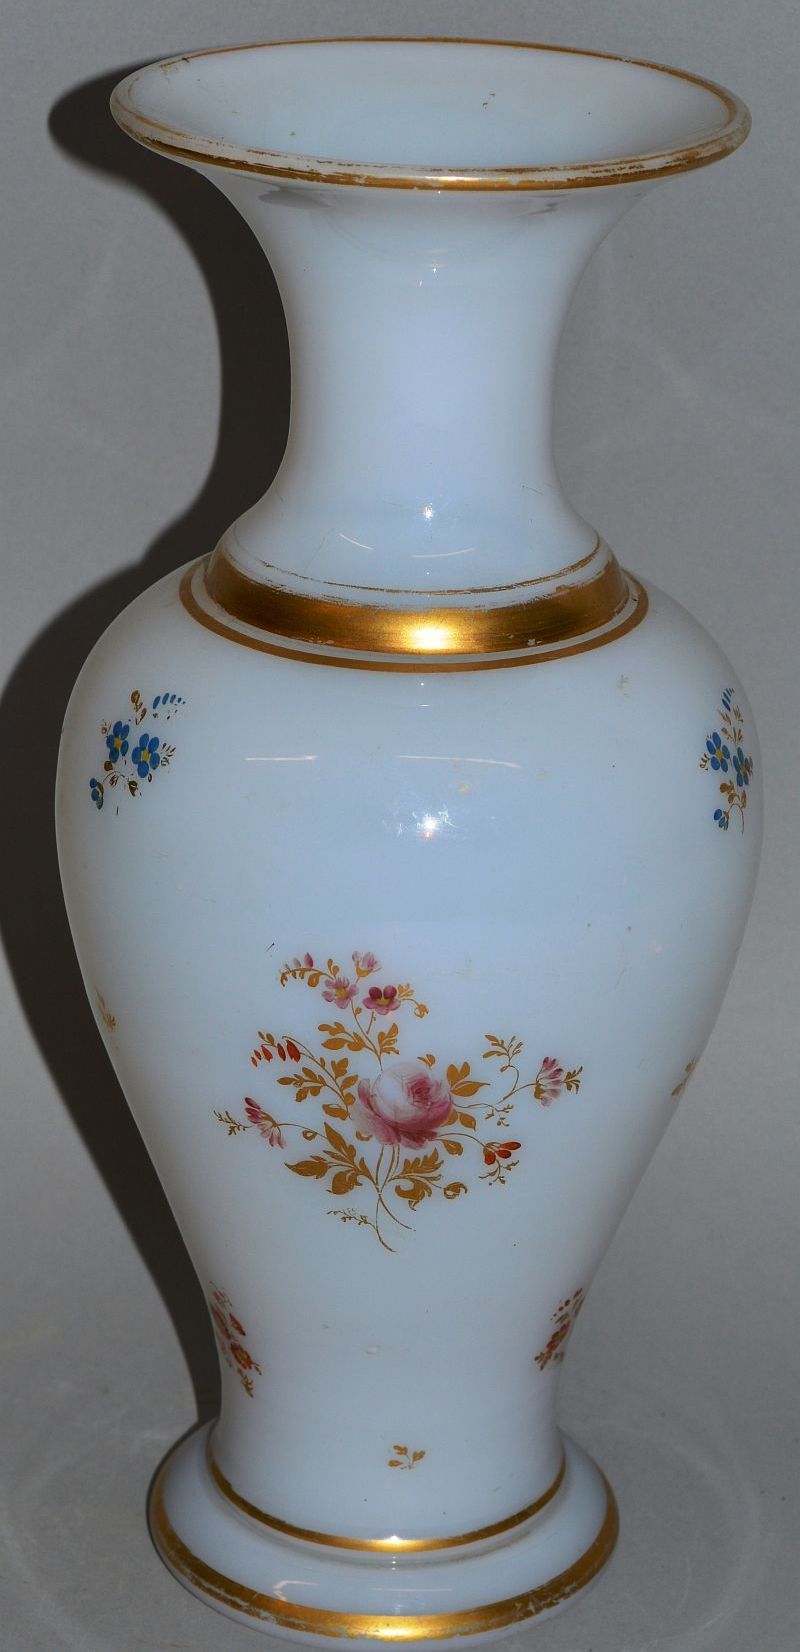 A 19TH CENTURY OPALINE GLASS VASE painted with flowers and gilded. 11.5ins high.